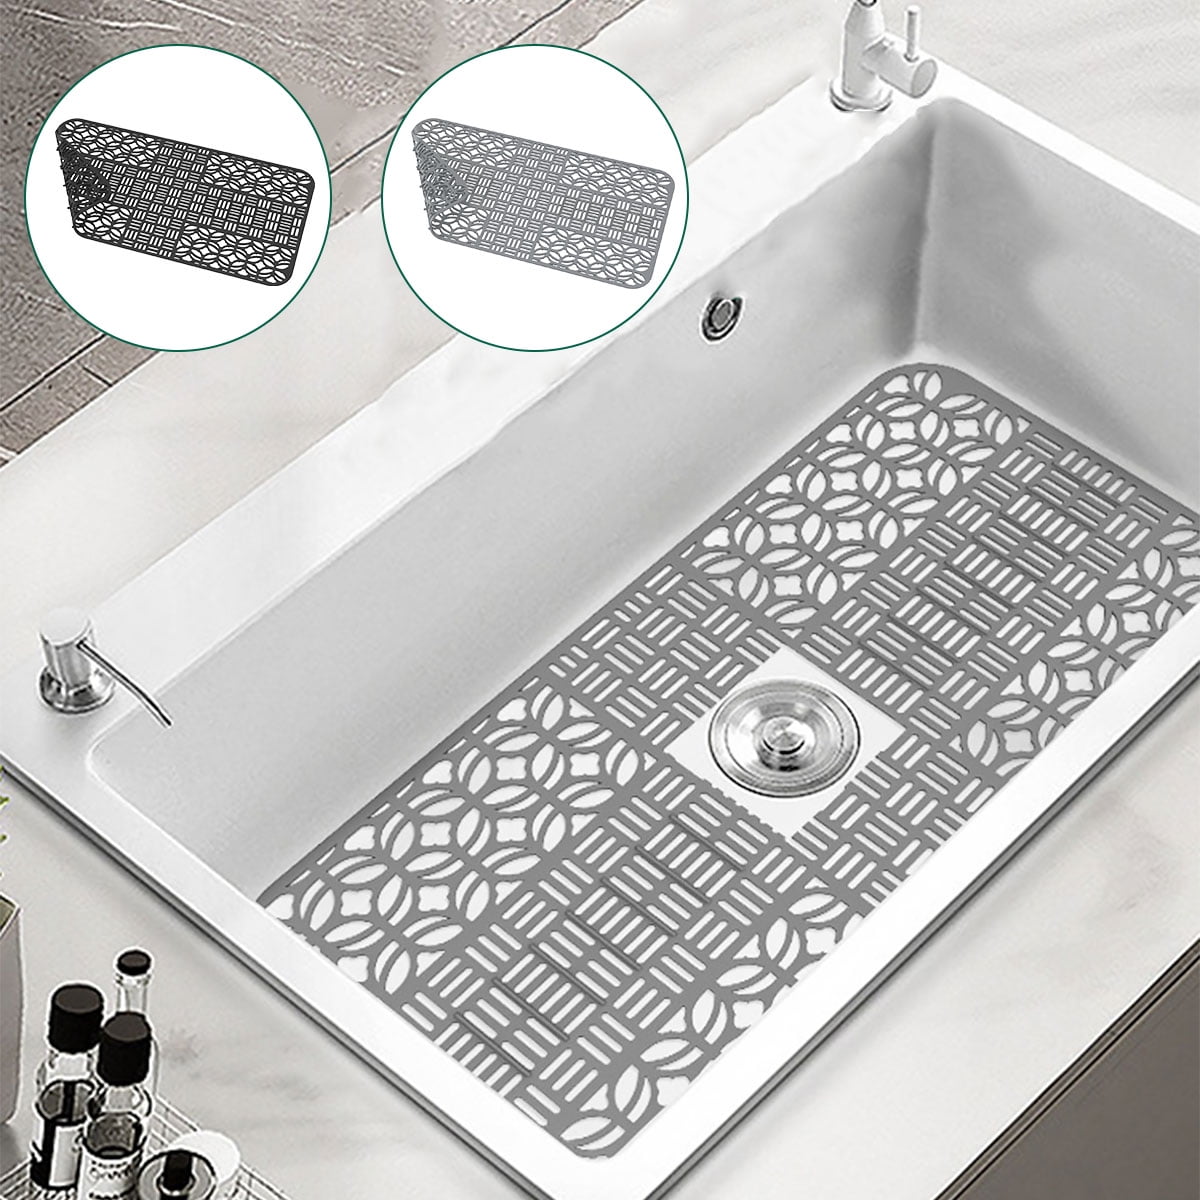 Decostatue Kitchen Sink Protector Mat - 2Pack Adjustable Sink Protectors for Kitchen Stainless Steel Sink - Fast Draining Sink Mats for Bo